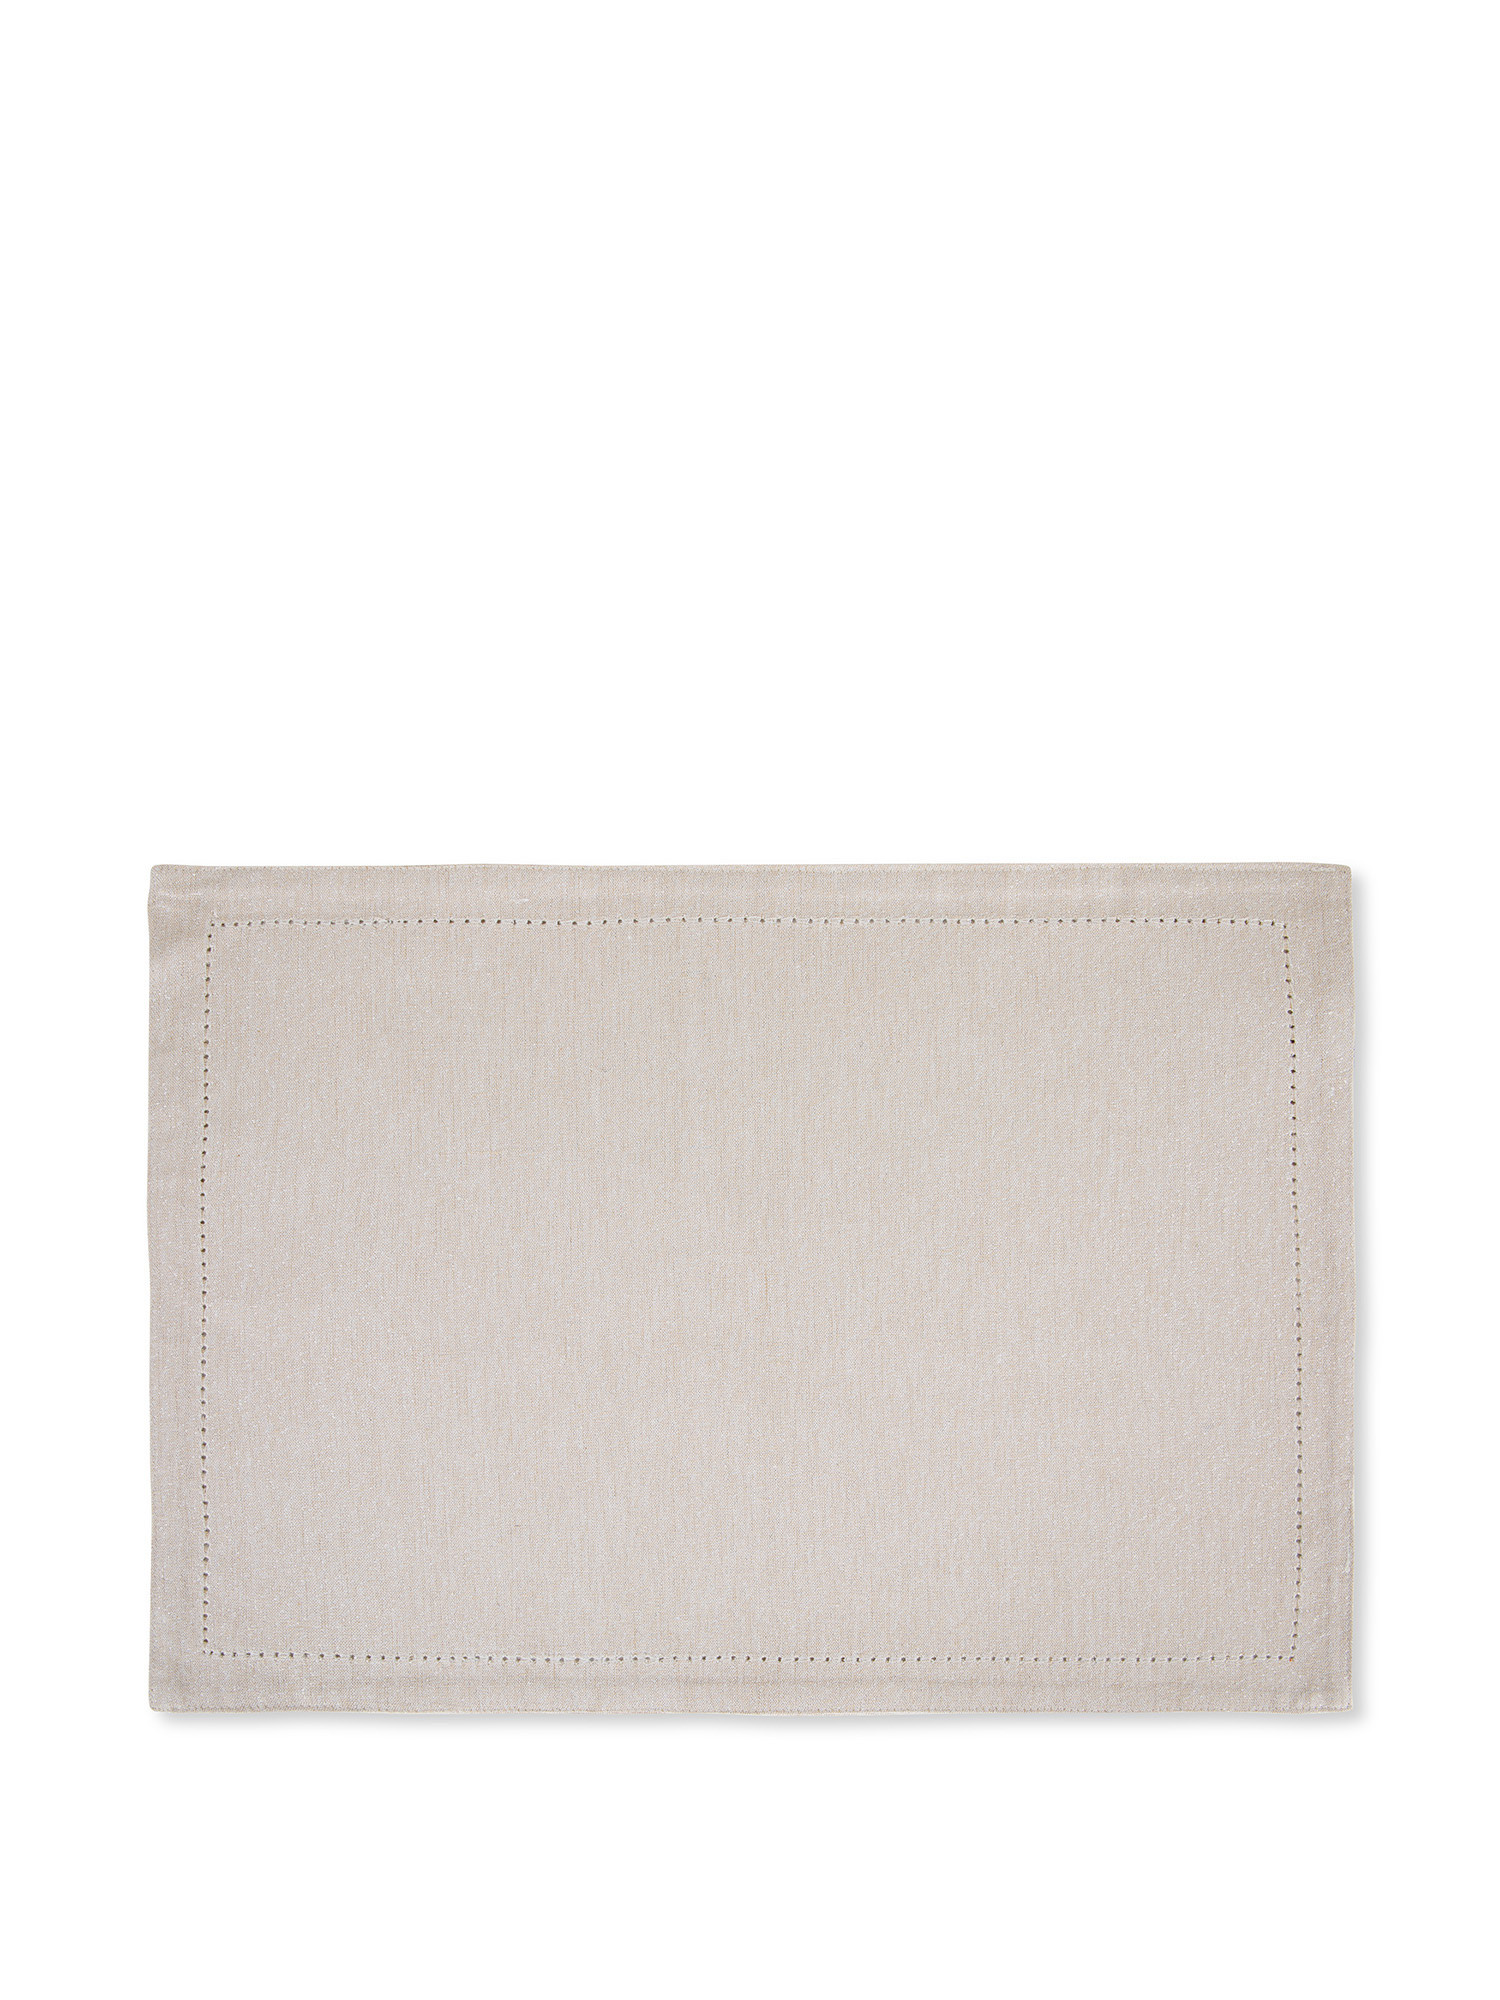 Solid color cotton placemat with lurex threads, Light Beige, large image number 0